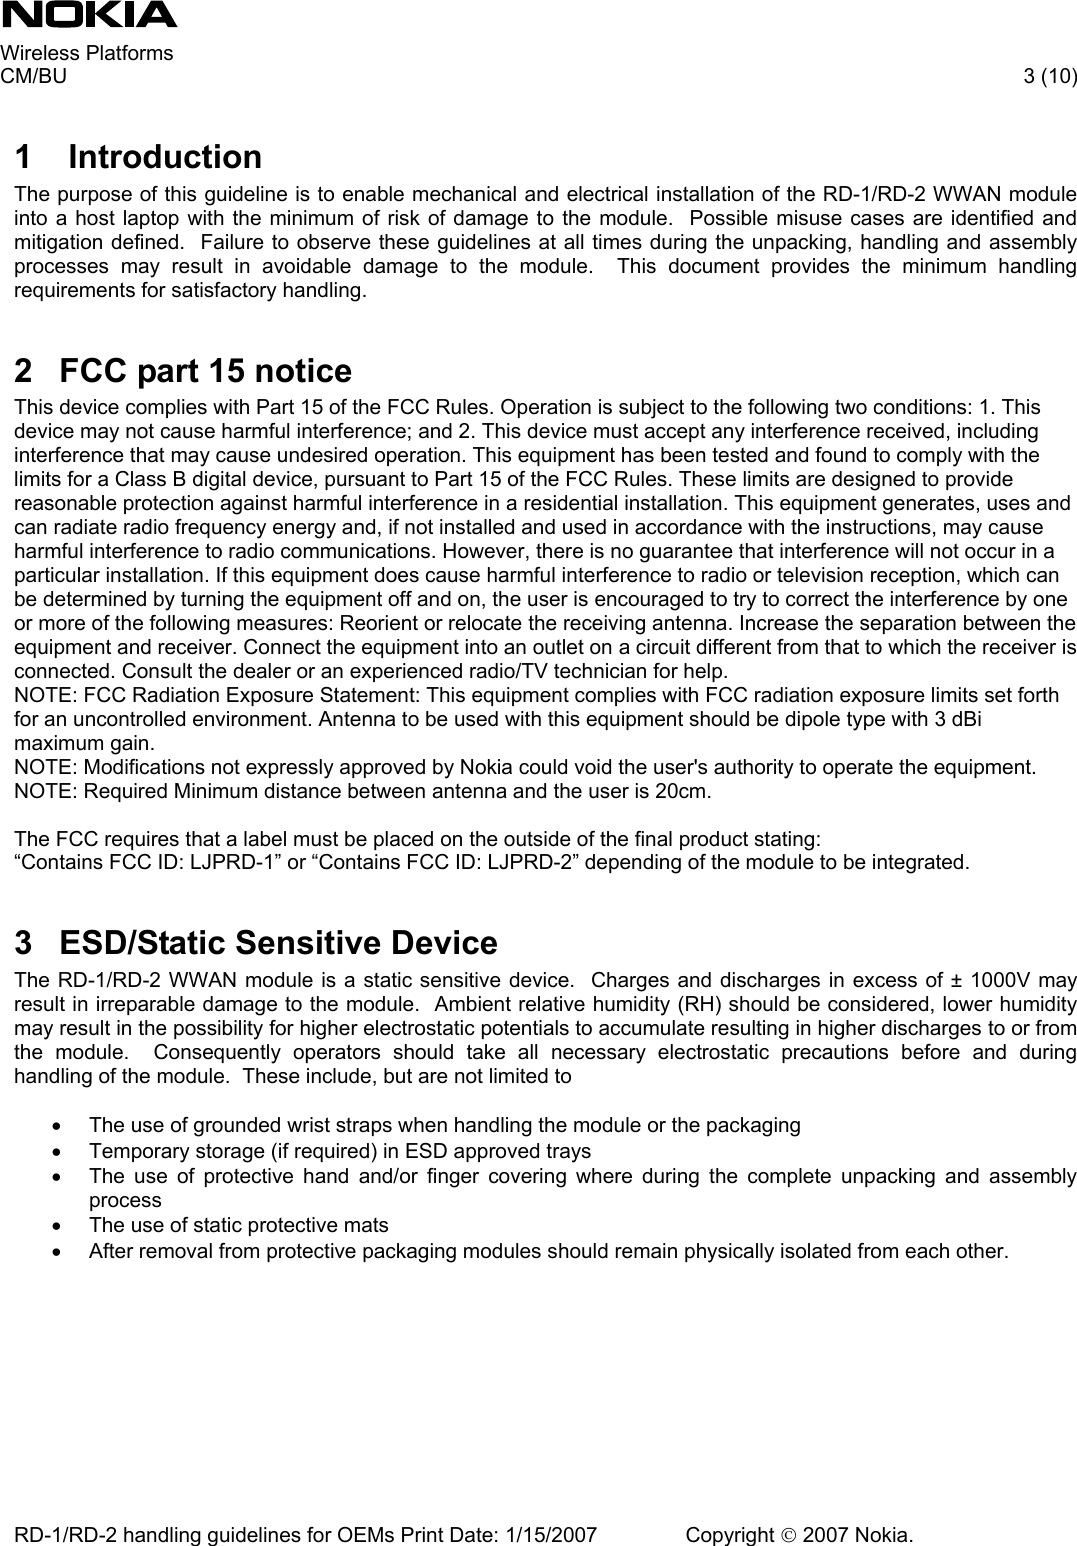     Wireless Platforms     CM/BU   3 (10) RD-1/RD-2 handling guidelines for OEMs Print Date: 1/15/2007   Copyright © 2007 Nokia.  1  Introduction The purpose of this guideline is to enable mechanical and electrical installation of the RD-1/RD-2 WWAN module into a host laptop with the minimum of risk of damage to the module.  Possible misuse cases are identified and mitigation defined.  Failure to observe these guidelines at all times during the unpacking, handling and assembly processes may result in avoidable damage to the module.  This document provides the minimum handling requirements for satisfactory handling.  2  FCC part 15 notice This device complies with Part 15 of the FCC Rules. Operation is subject to the following two conditions: 1. This device may not cause harmful interference; and 2. This device must accept any interference received, including interference that may cause undesired operation. This equipment has been tested and found to comply with the limits for a Class B digital device, pursuant to Part 15 of the FCC Rules. These limits are designed to provide reasonable protection against harmful interference in a residential installation. This equipment generates, uses and can radiate radio frequency energy and, if not installed and used in accordance with the instructions, may cause harmful interference to radio communications. However, there is no guarantee that interference will not occur in a particular installation. If this equipment does cause harmful interference to radio or television reception, which can be determined by turning the equipment off and on, the user is encouraged to try to correct the interference by one or more of the following measures: Reorient or relocate the receiving antenna. Increase the separation between the equipment and receiver. Connect the equipment into an outlet on a circuit different from that to which the receiver is connected. Consult the dealer or an experienced radio/TV technician for help. NOTE: FCC Radiation Exposure Statement: This equipment complies with FCC radiation exposure limits set forth for an uncontrolled environment. Antenna to be used with this equipment should be dipole type with 3 dBi maximum gain. NOTE: Modifications not expressly approved by Nokia could void the user&apos;s authority to operate the equipment. NOTE: Required Minimum distance between antenna and the user is 20cm.  The FCC requires that a label must be placed on the outside of the final product stating:  “Contains FCC ID: LJPRD-1” or “Contains FCC ID: LJPRD-2” depending of the module to be integrated.  3  ESD/Static Sensitive Device The RD-1/RD-2 WWAN module is a static sensitive device.  Charges and discharges in excess of ± 1000V may result in irreparable damage to the module.  Ambient relative humidity (RH) should be considered, lower humidity may result in the possibility for higher electrostatic potentials to accumulate resulting in higher discharges to or from the module.  Consequently operators should take all necessary electrostatic precautions before and during handling of the module.  These include, but are not limited to  •  The use of grounded wrist straps when handling the module or the packaging •  Temporary storage (if required) in ESD approved trays •  The use of protective hand and/or finger covering where during the complete unpacking and assembly process •  The use of static protective mats •  After removal from protective packaging modules should remain physically isolated from each other. 